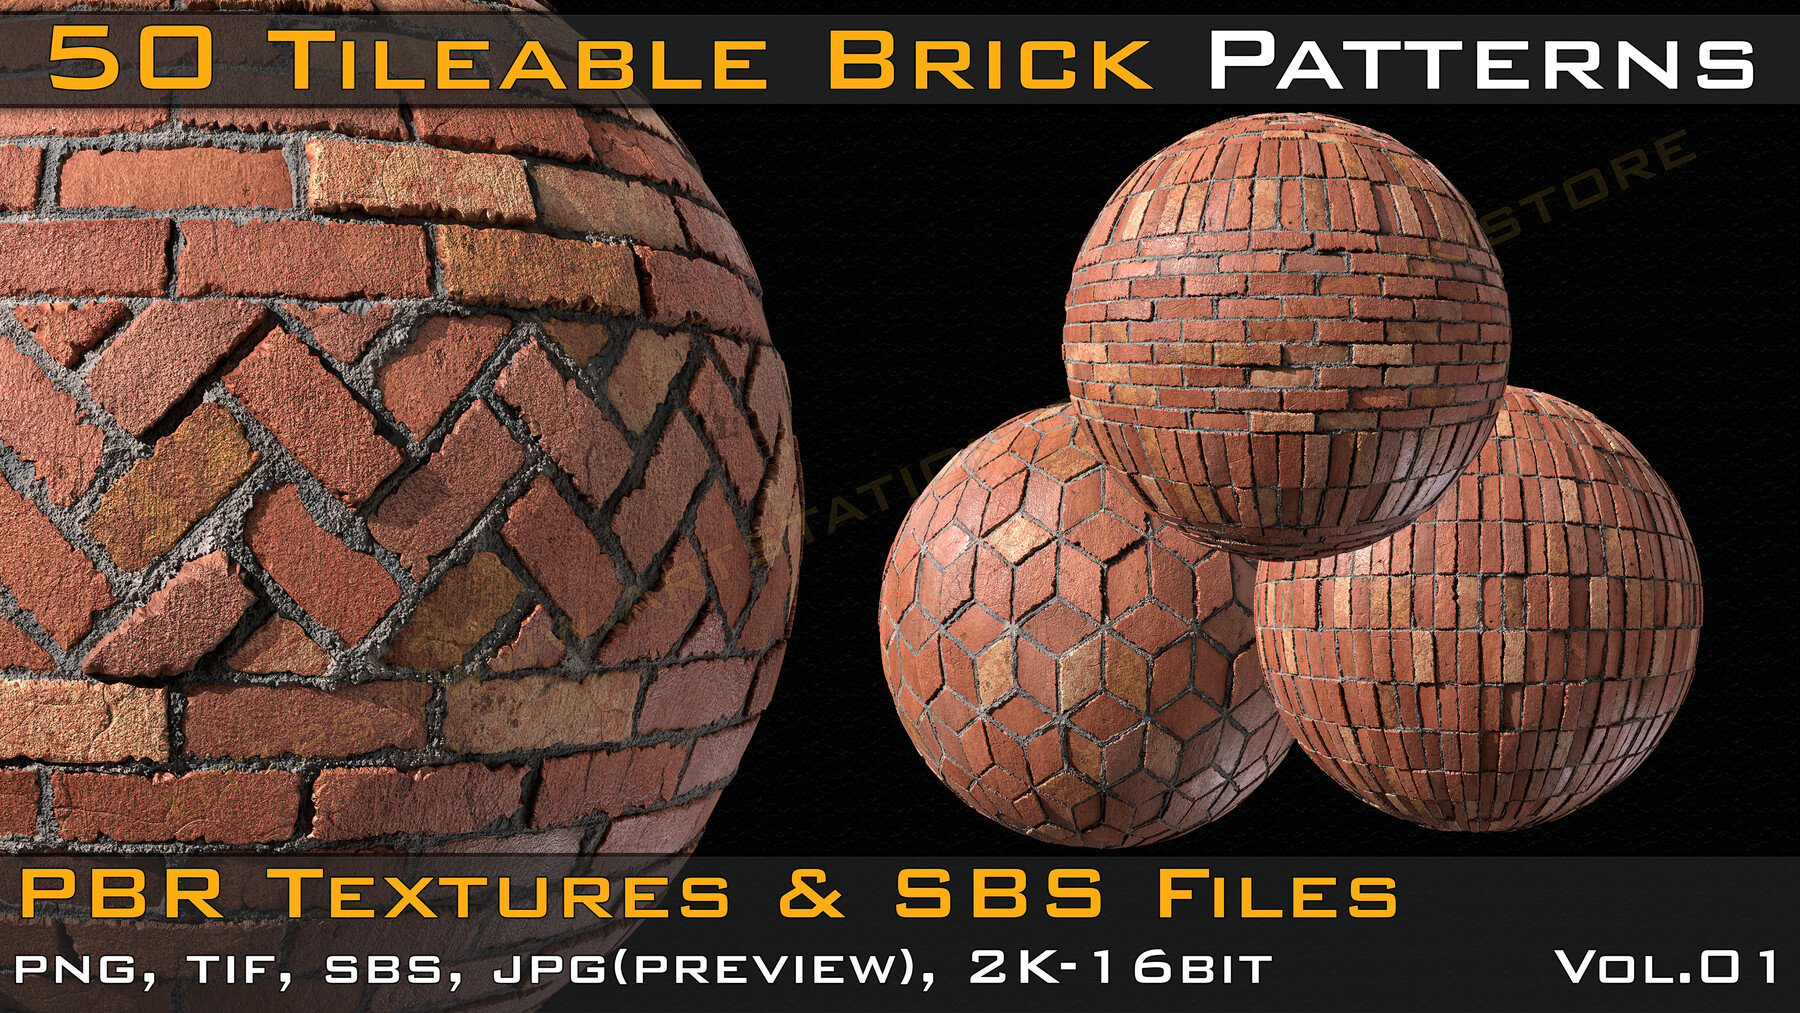 3D Game Asset Store - Fabric Leather Seamless PBR Texture 03